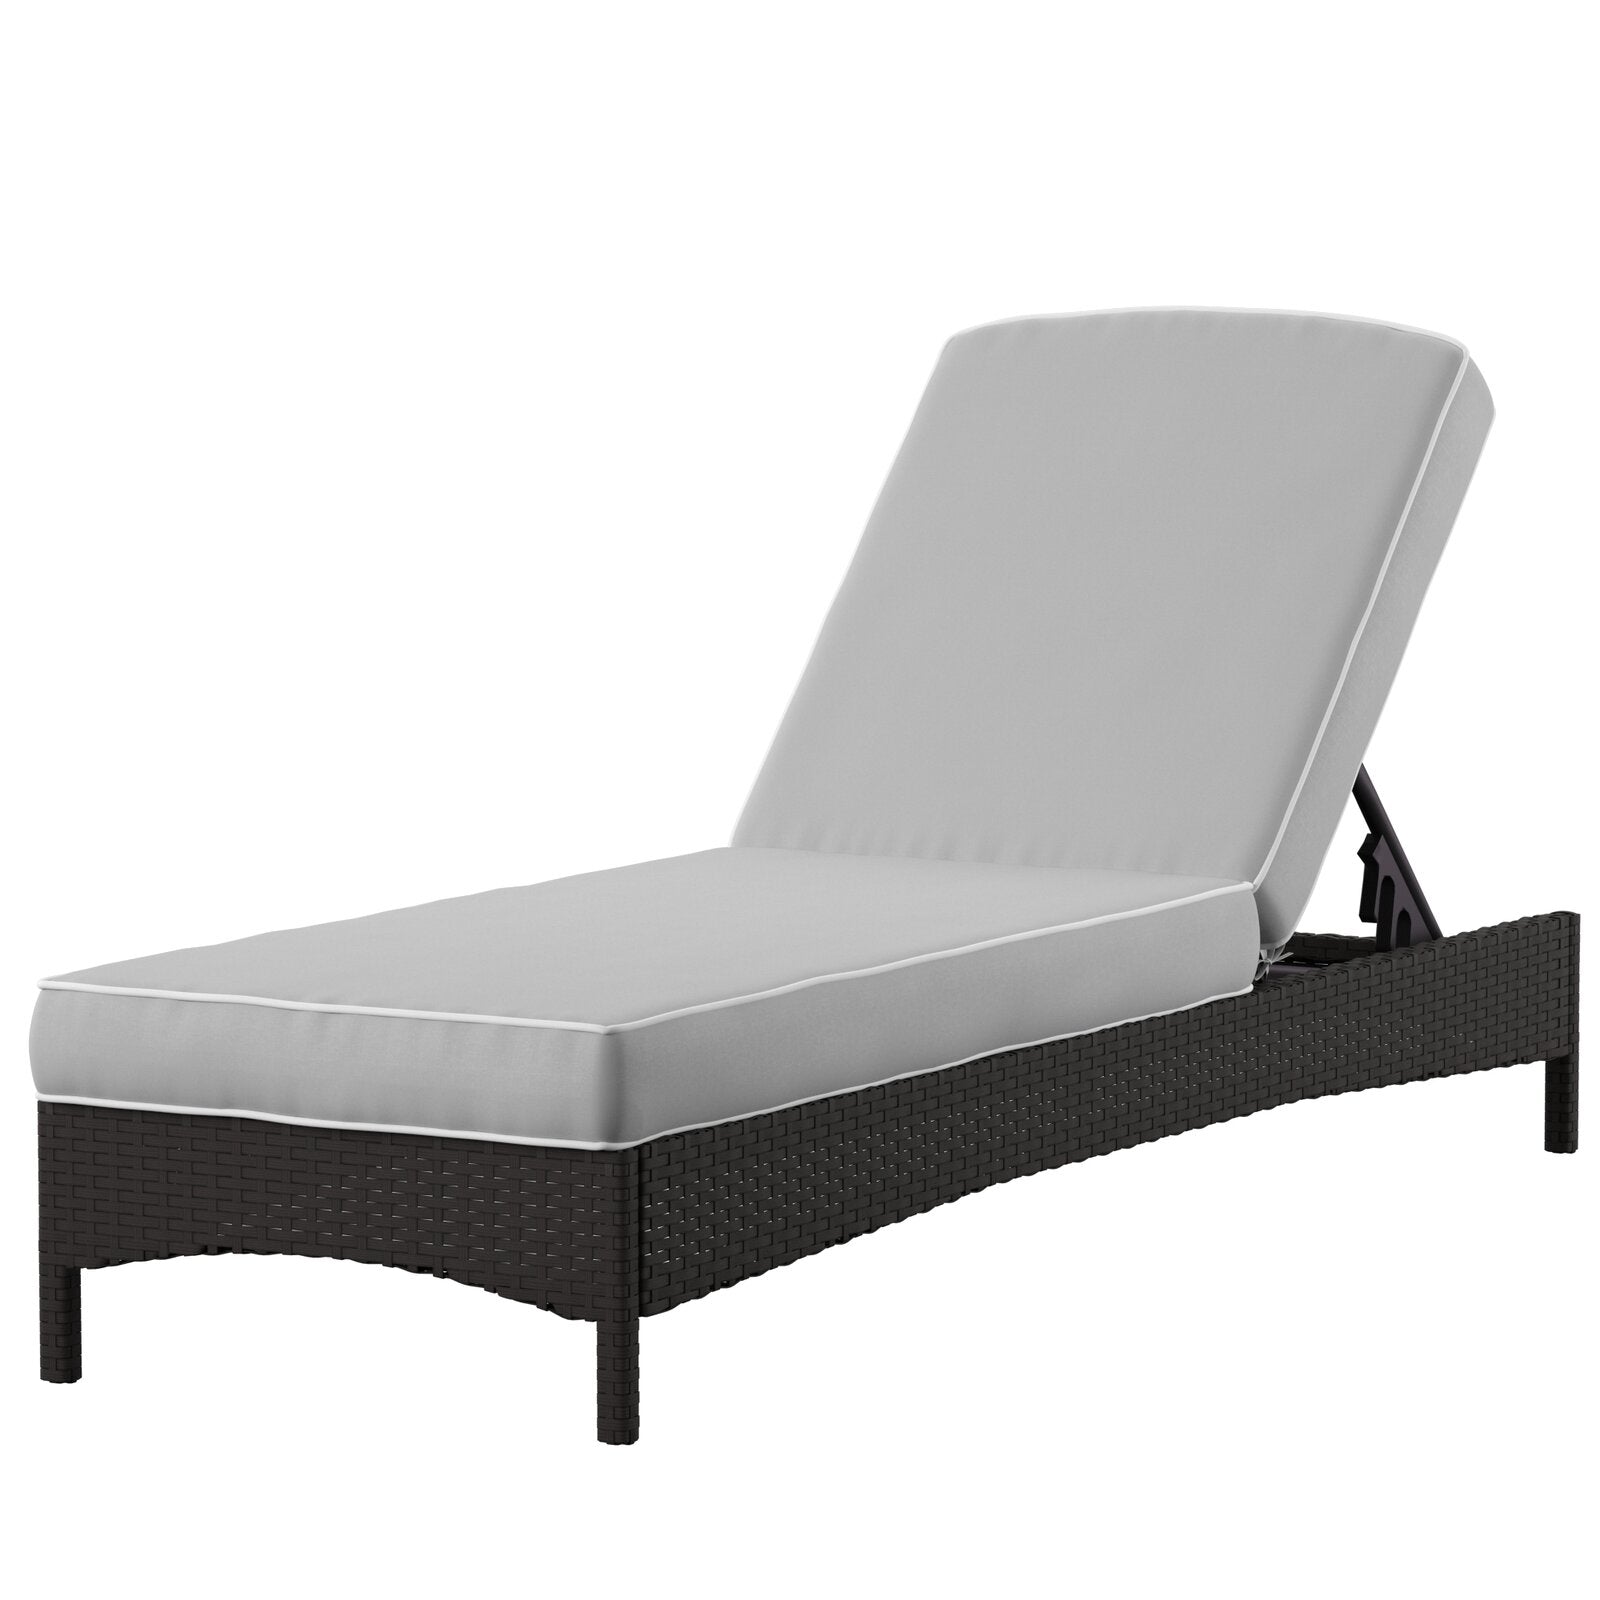 Dreamline Outdoor Furniture Poolside/Swimming Pool Lounger With Cushion (Black)